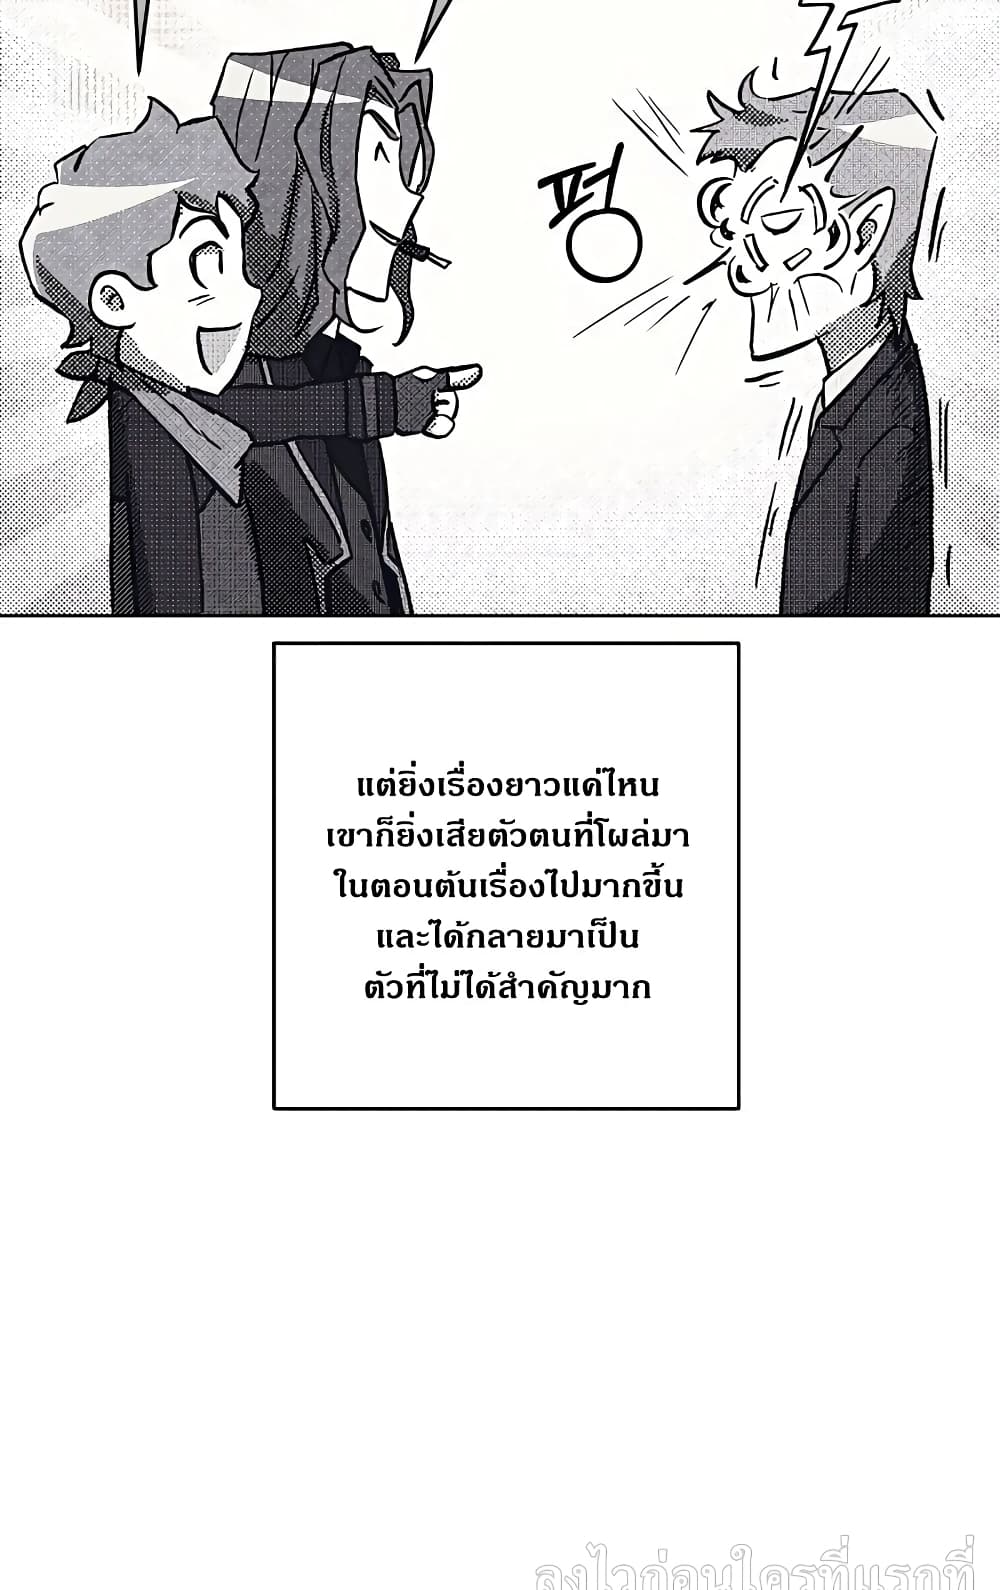 Surviving in an Action Manhwa 6 030